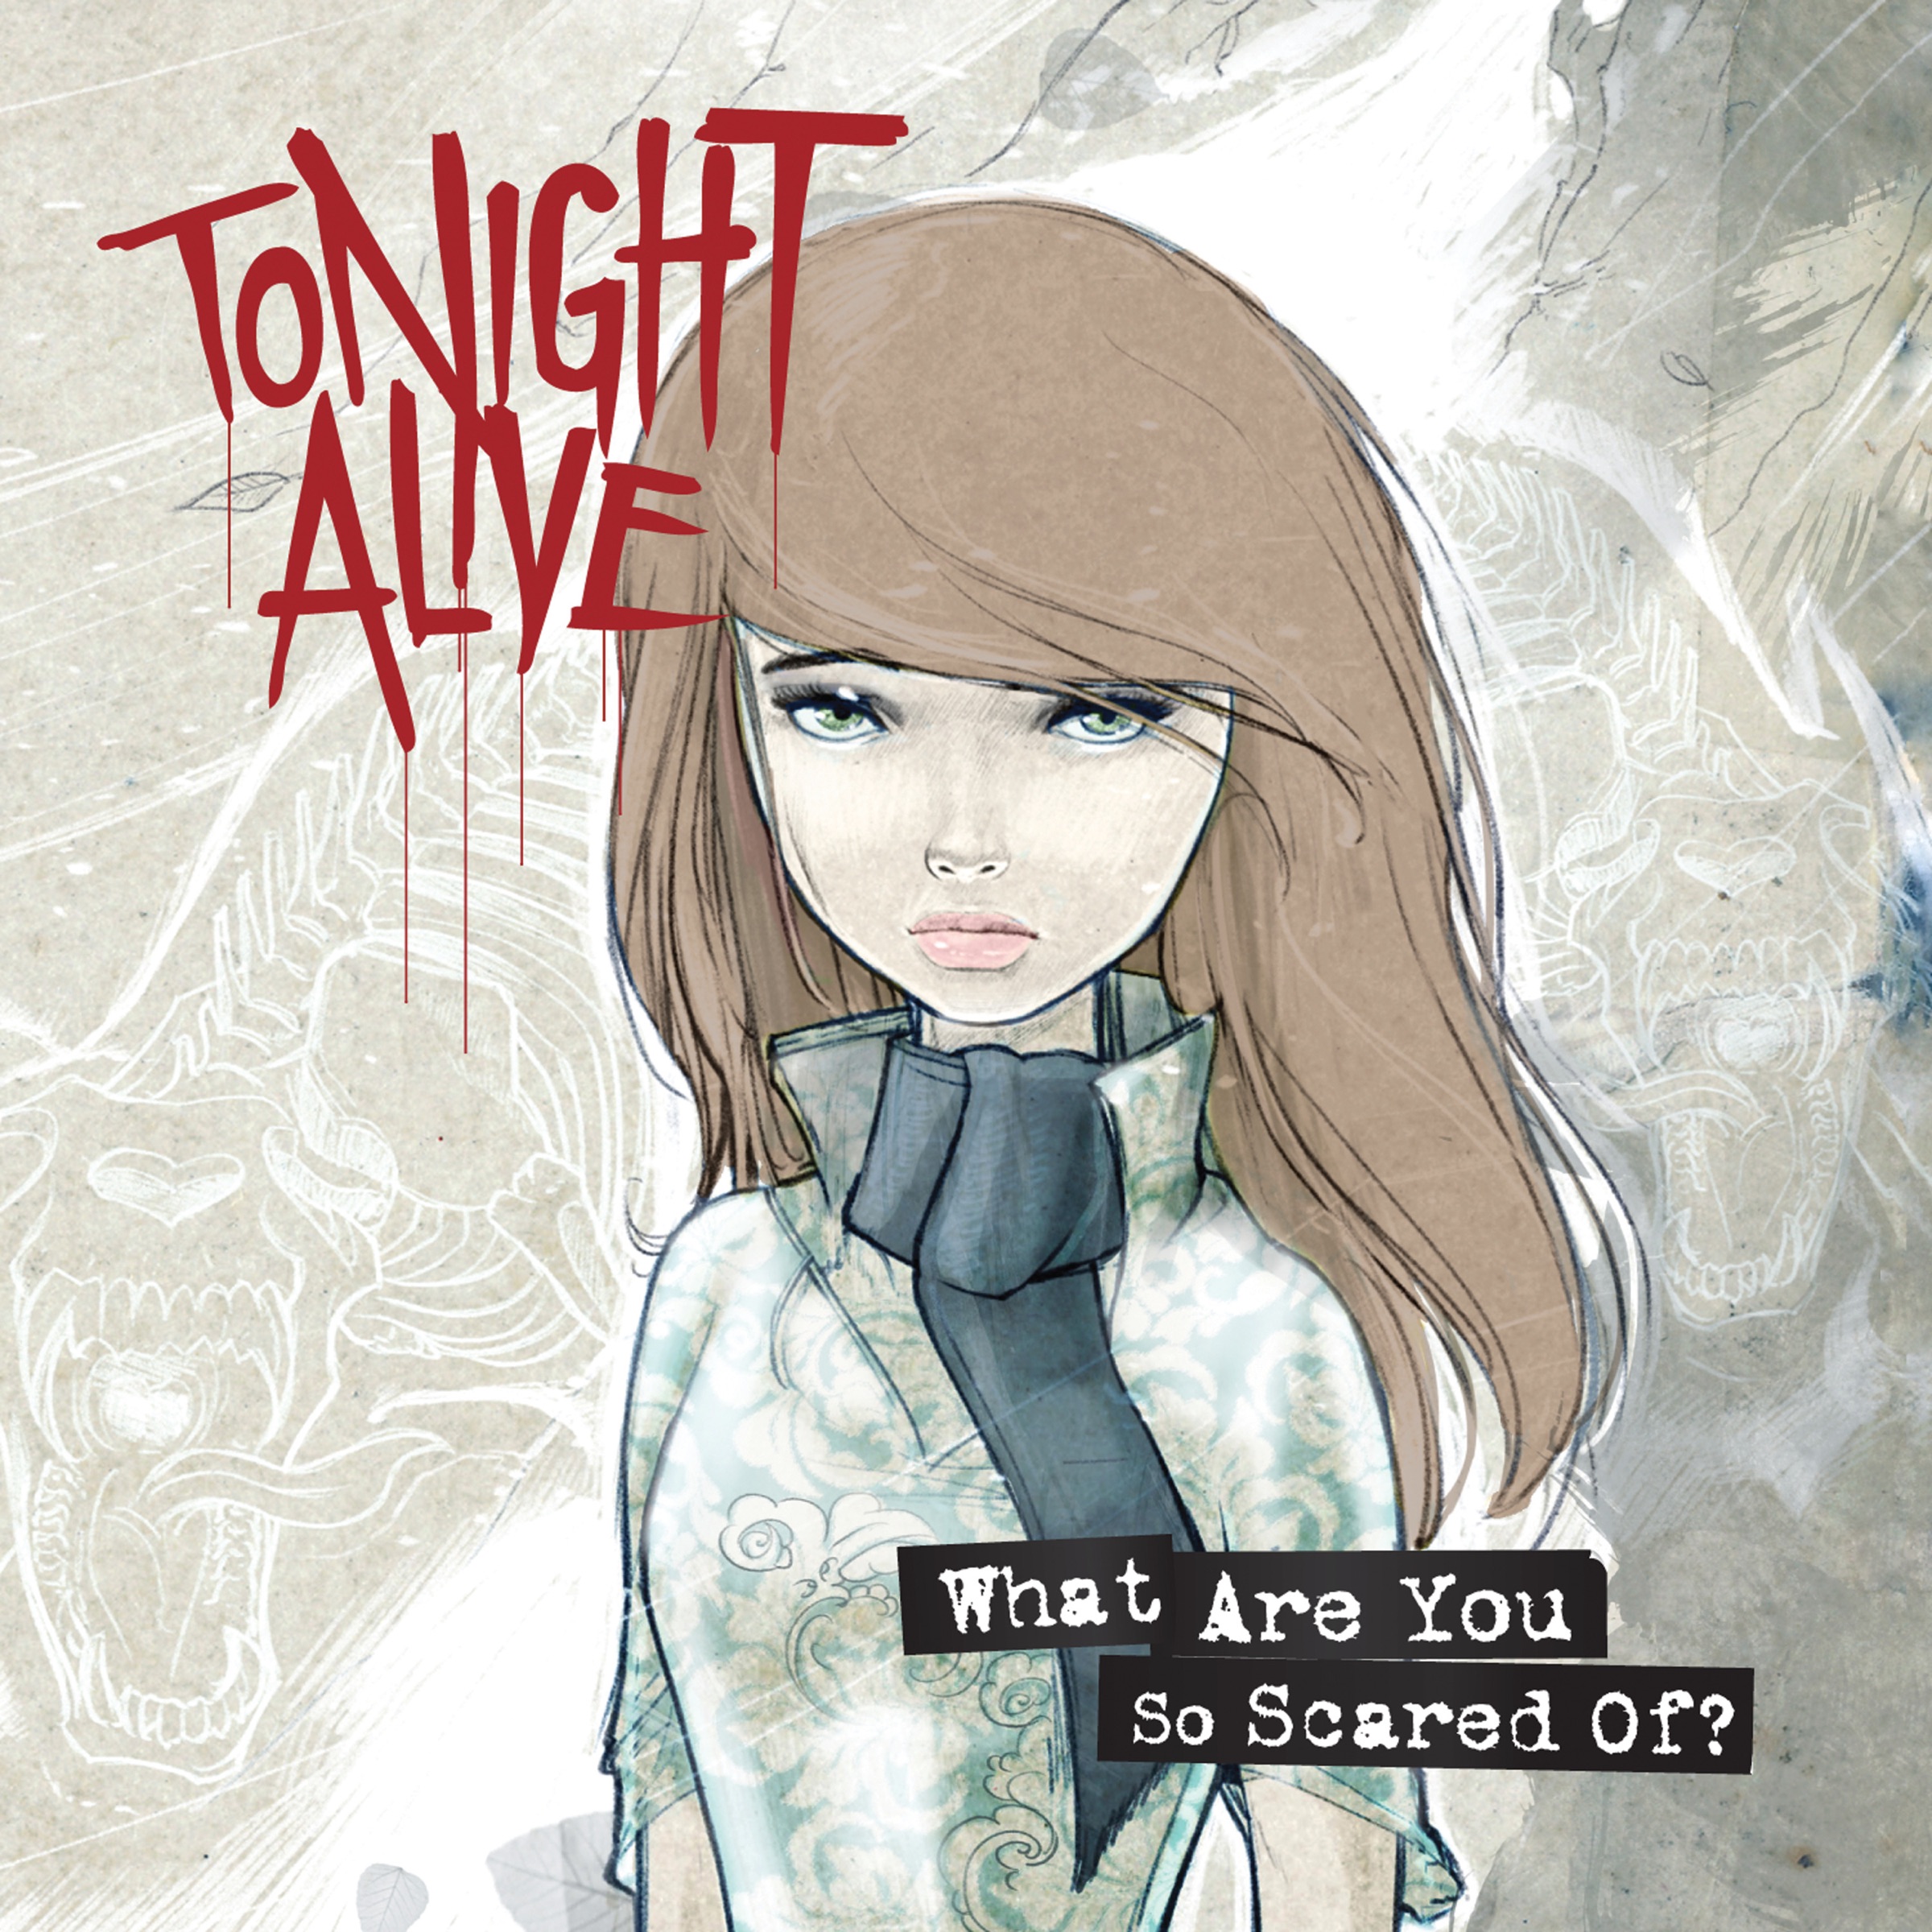 Tonight Alive What Are You So Scared Of? cover artwork